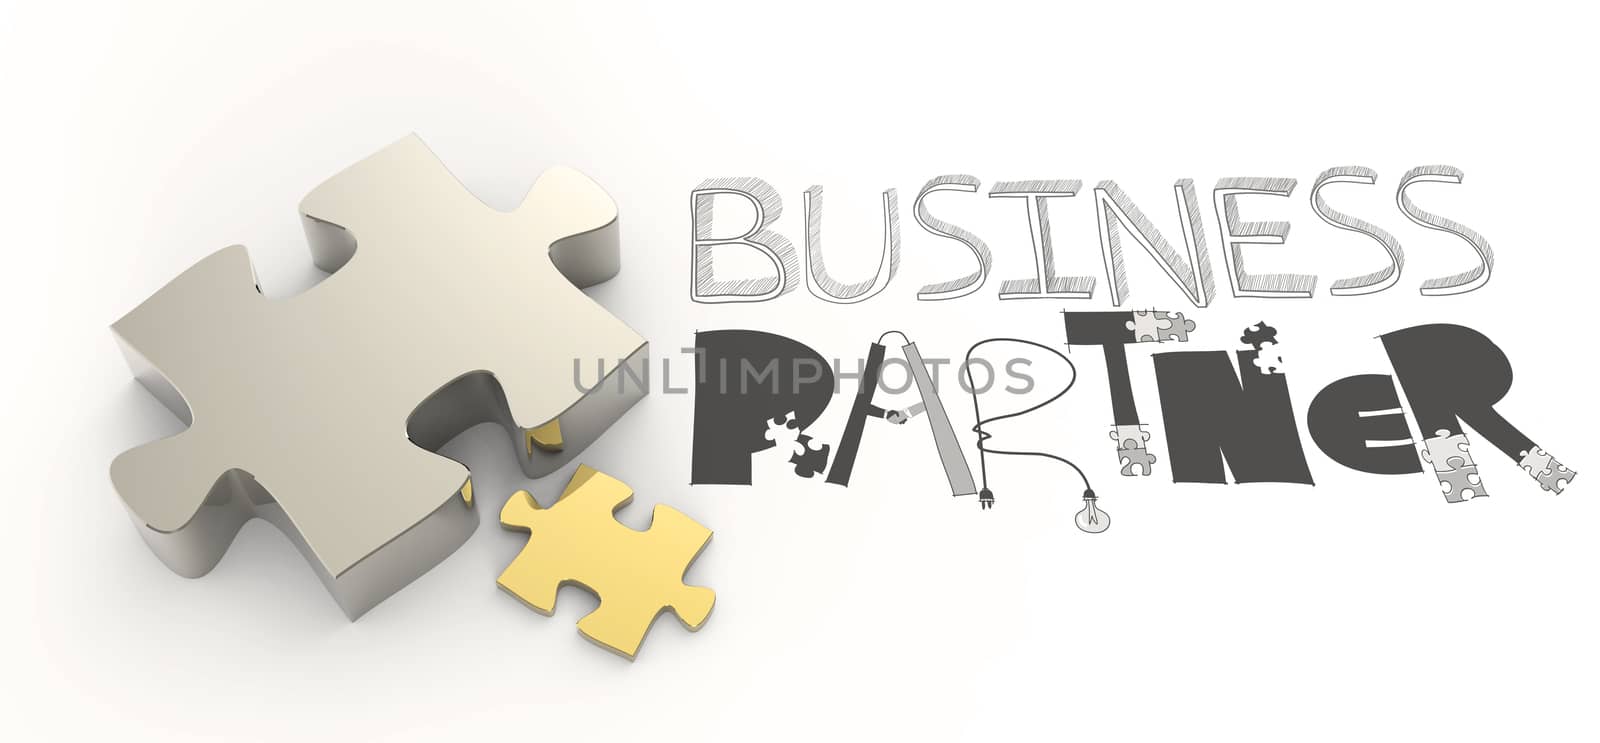 hand drawn graphic word BUSINESS PARTNER and 3d puzzle as concept